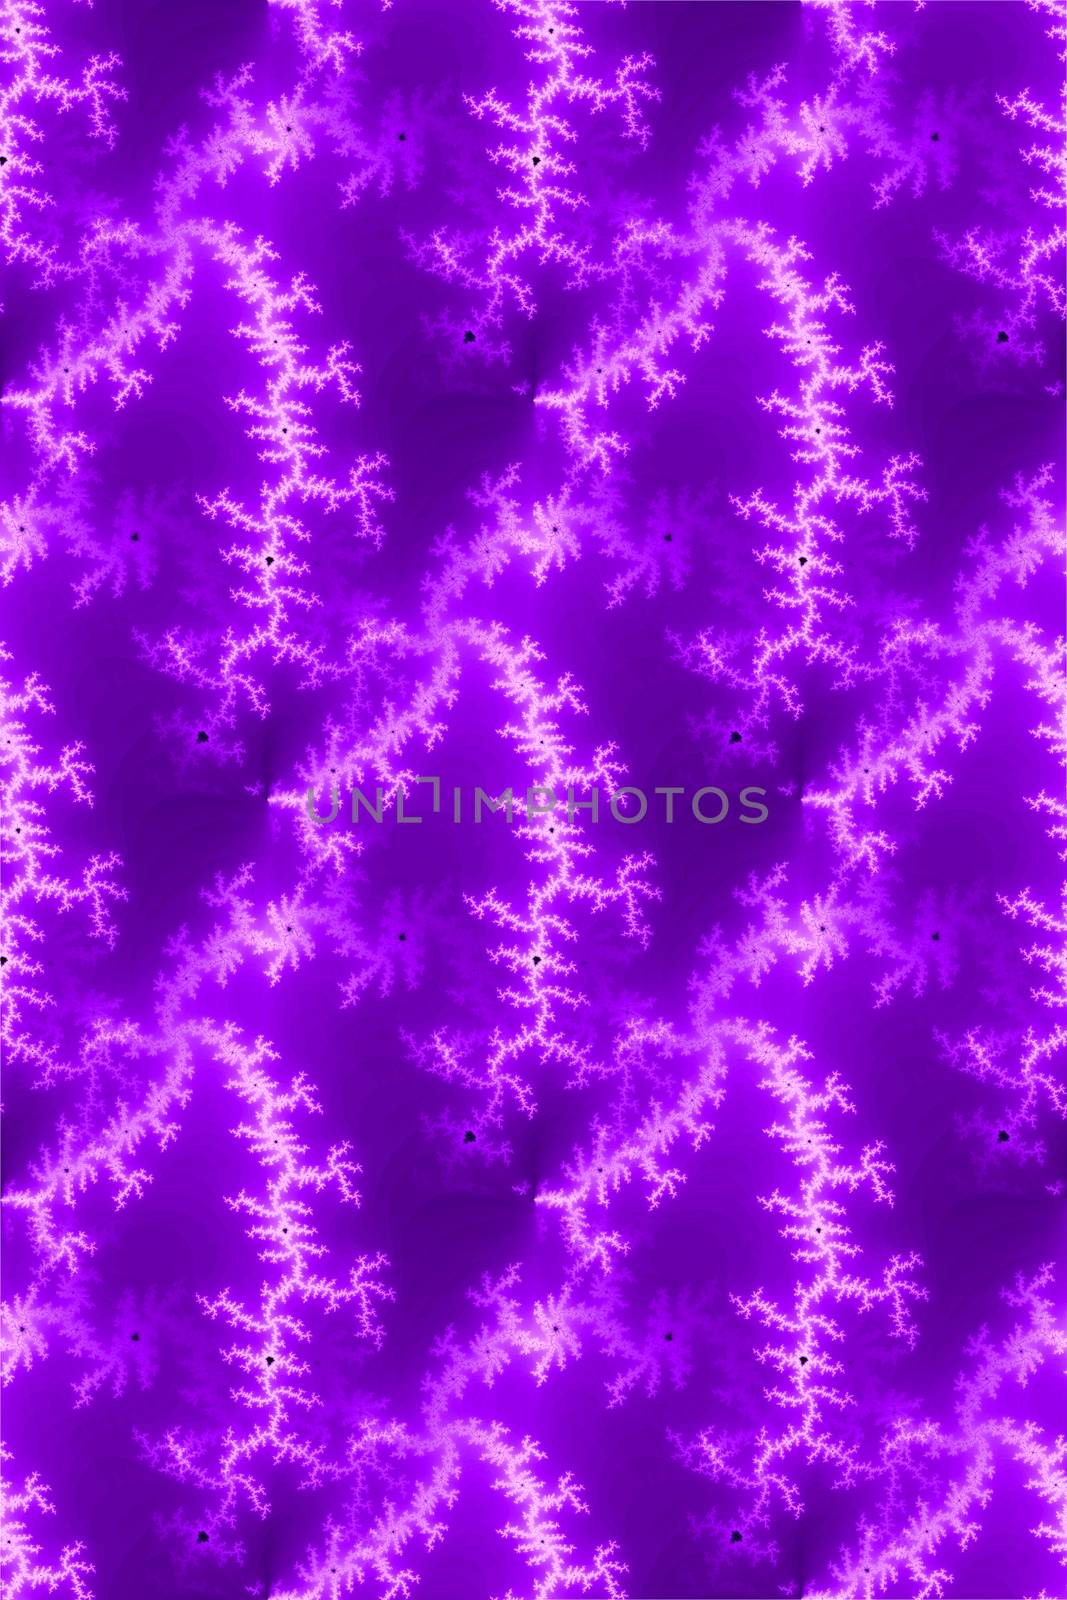 Fractal background image with bright purple colors.